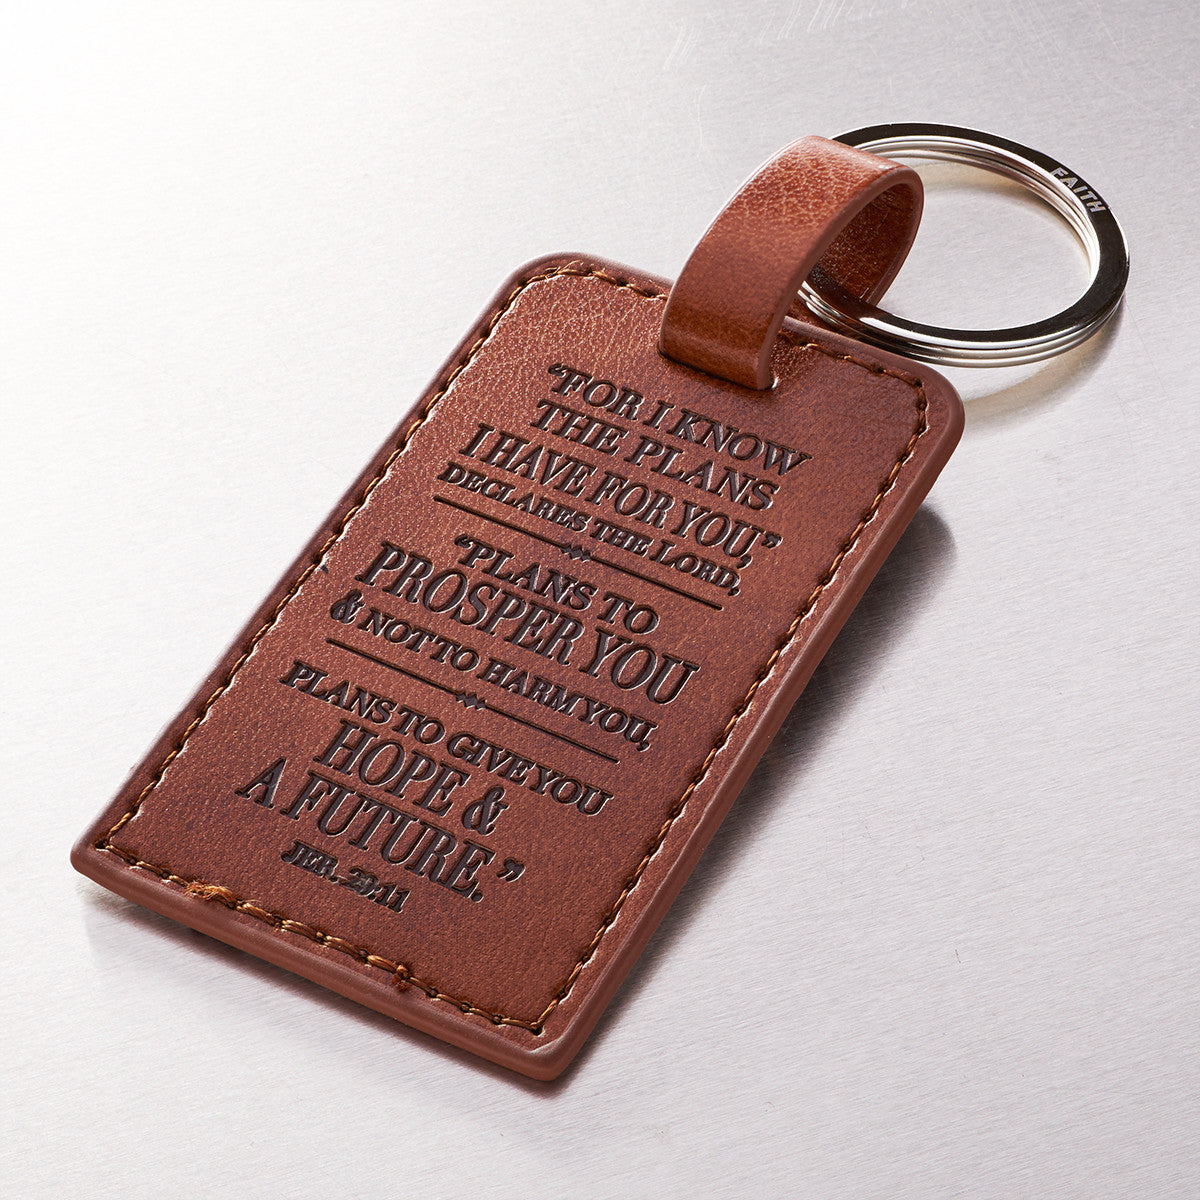 Image of I Know the Plans Jer 29:11 Brown LuxLeather Keyring other